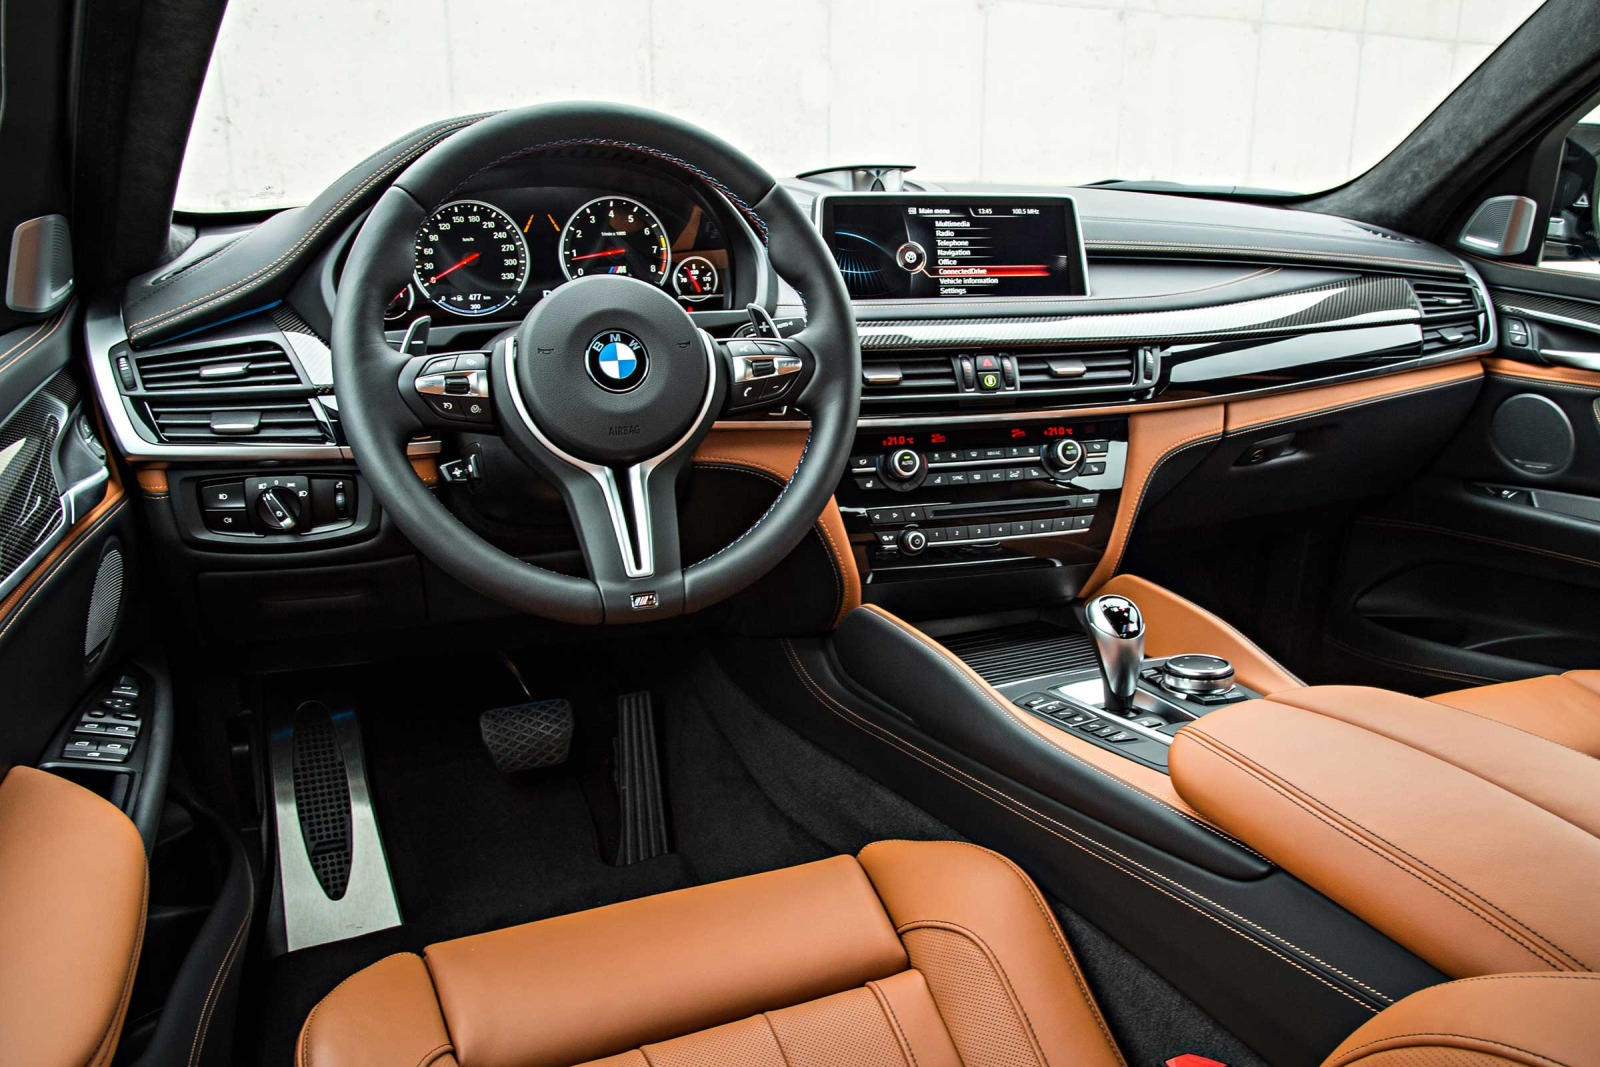 2019 BMW X6 M Interior Dimensions: Seating, Cargo Space & Trunk Size -  Photos | CarBuzz